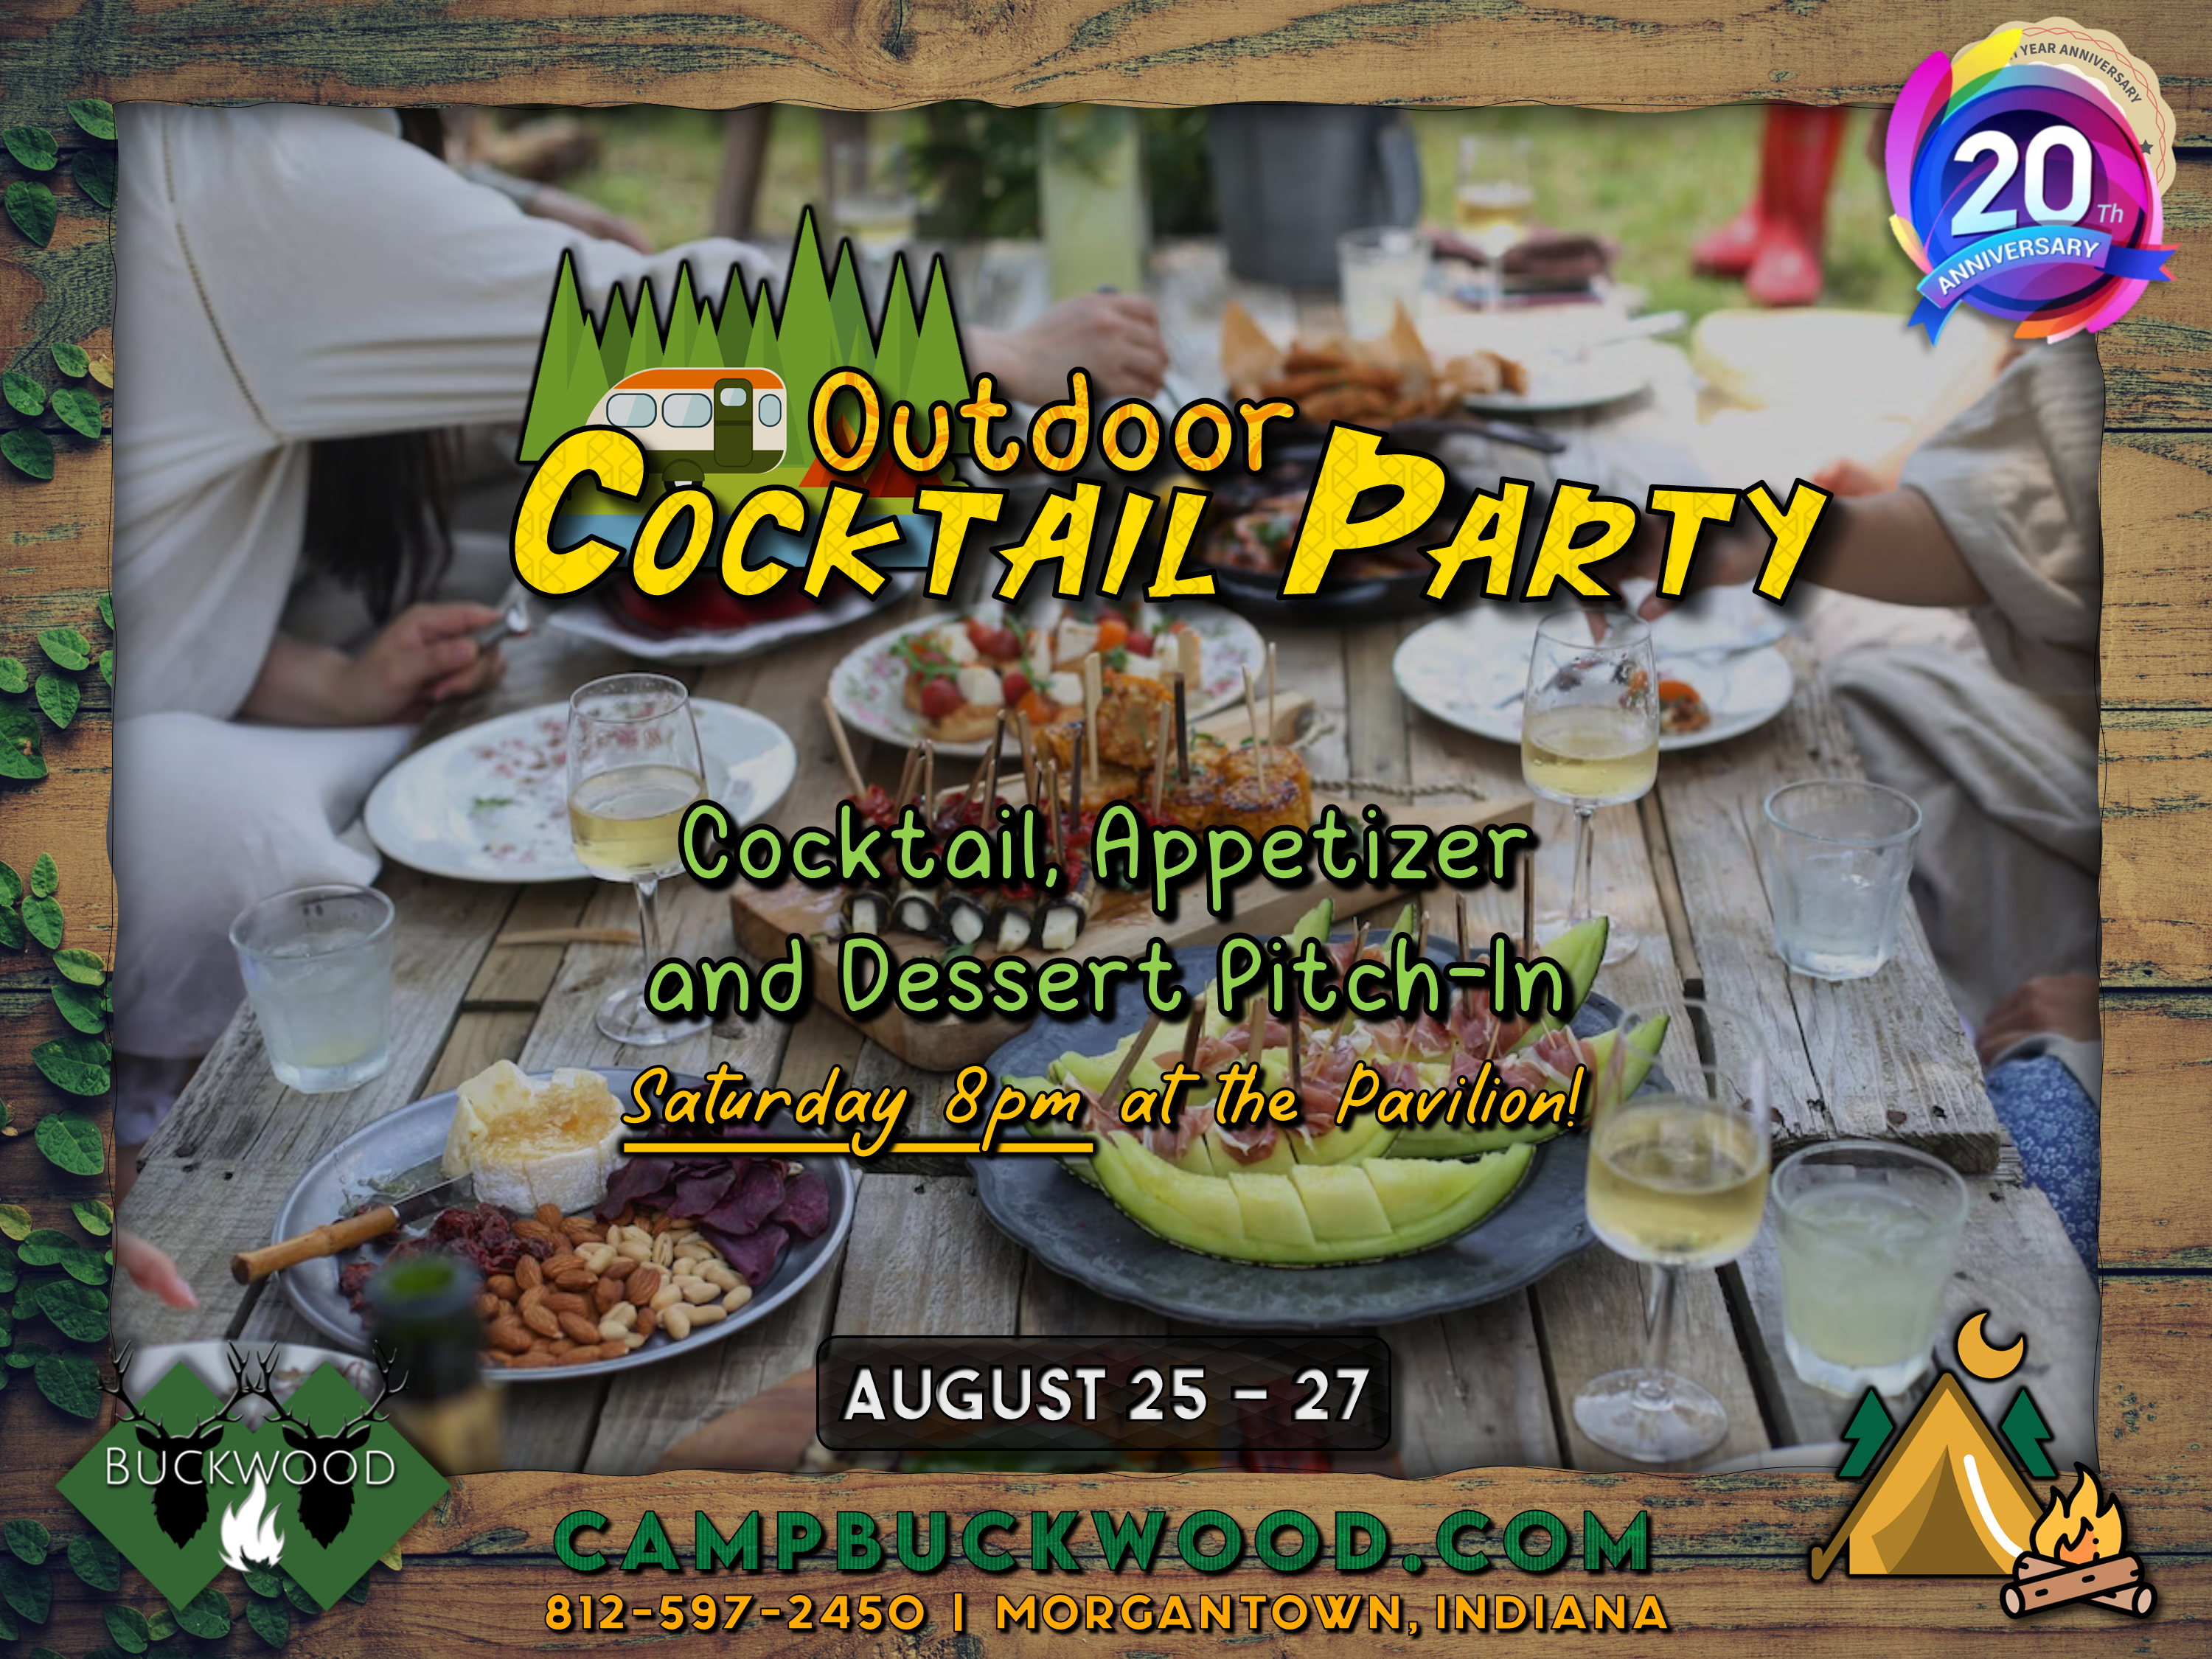 Camp Buckwood 2023 Outdoor Cocktail Party Weened Event